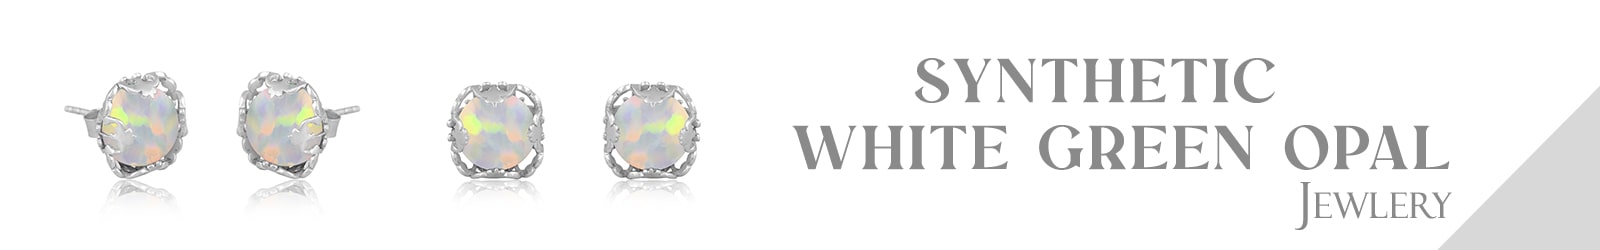 Silver Synthetic White Green Opal Jewelry Wholesale Supplier